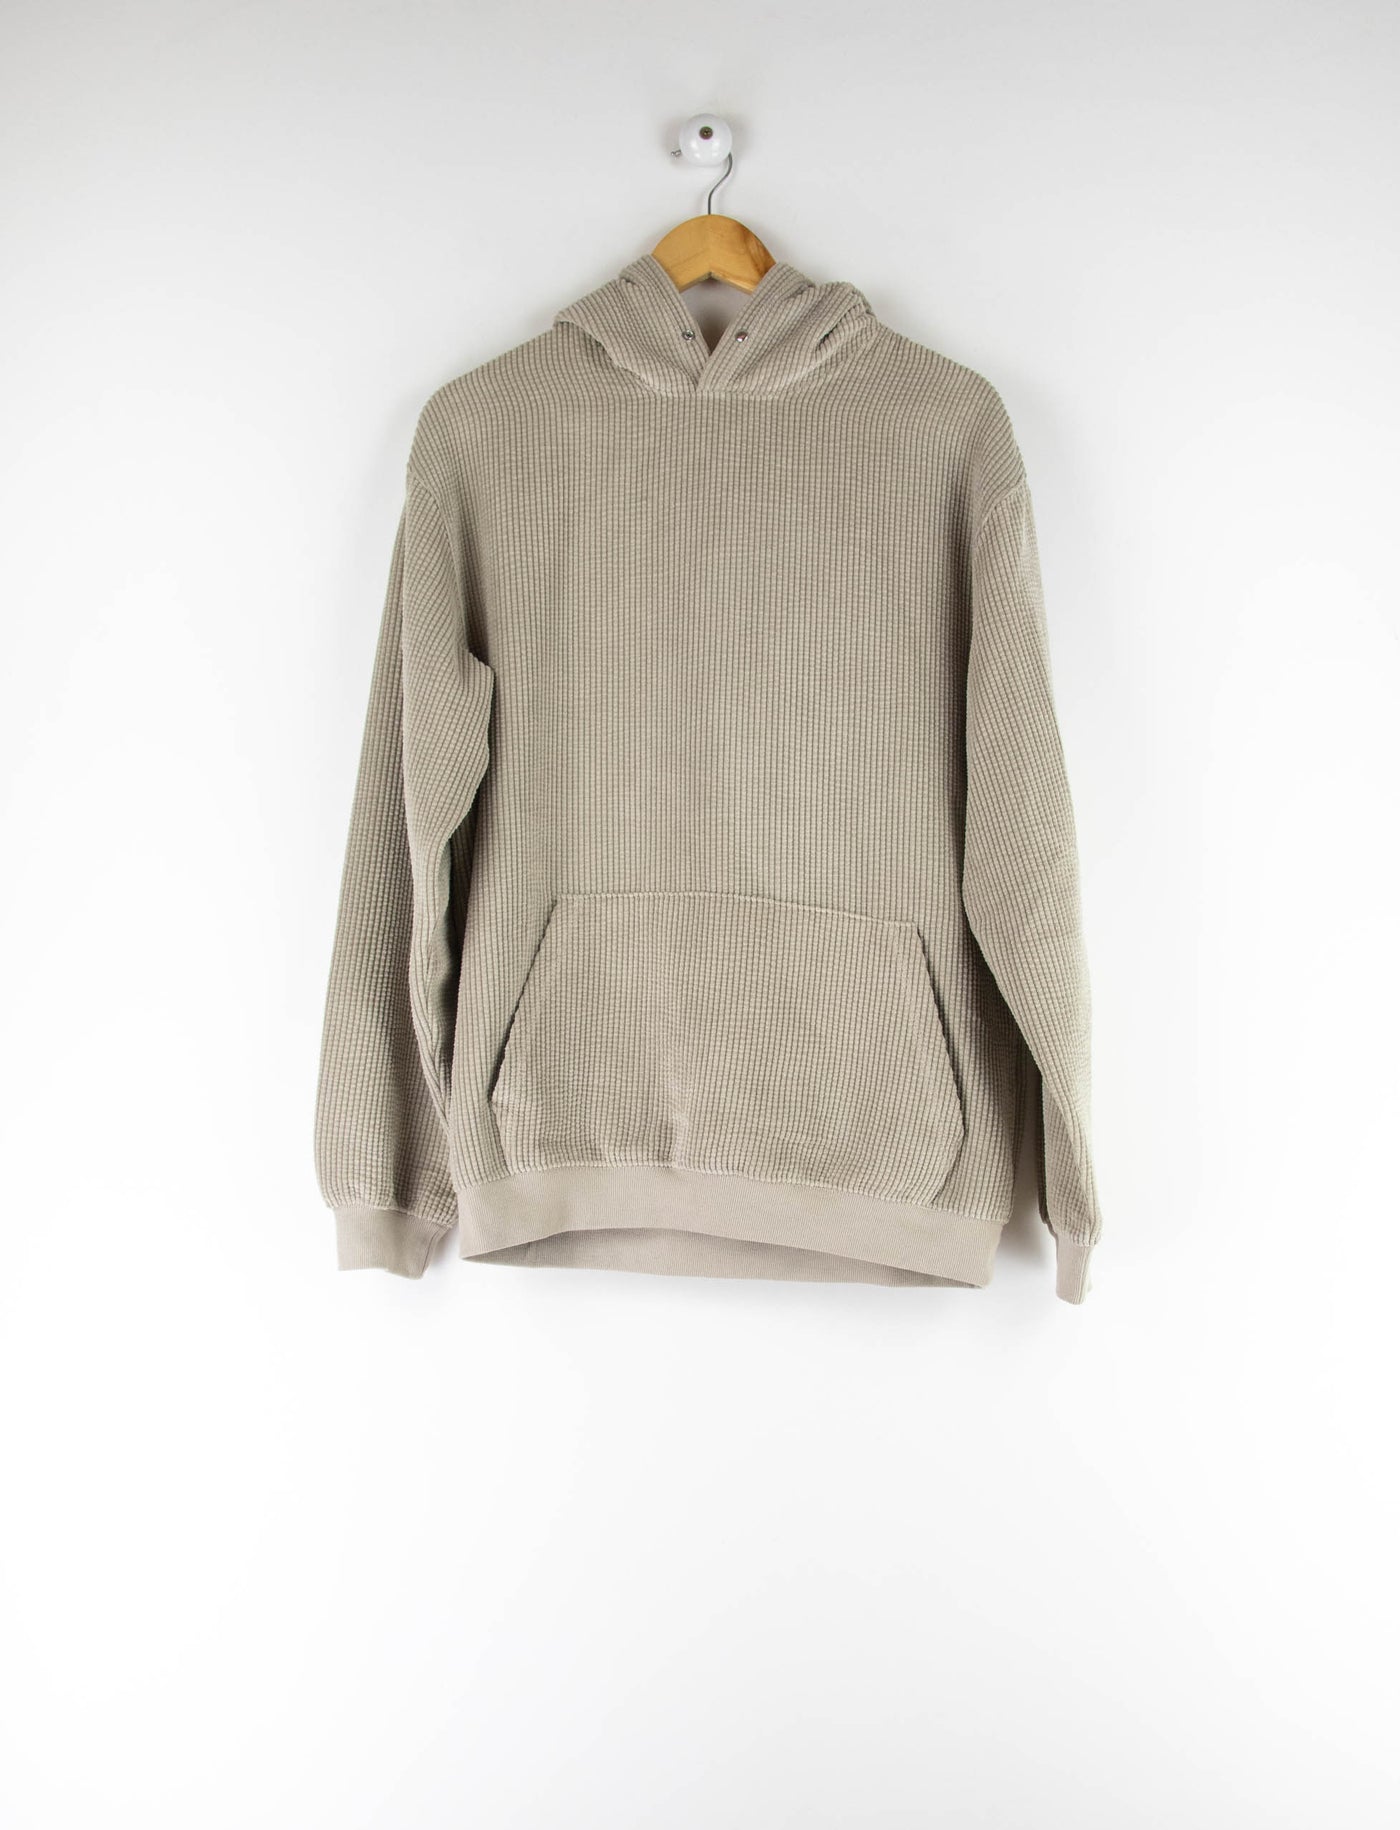 Sudadera beige tipo canalé